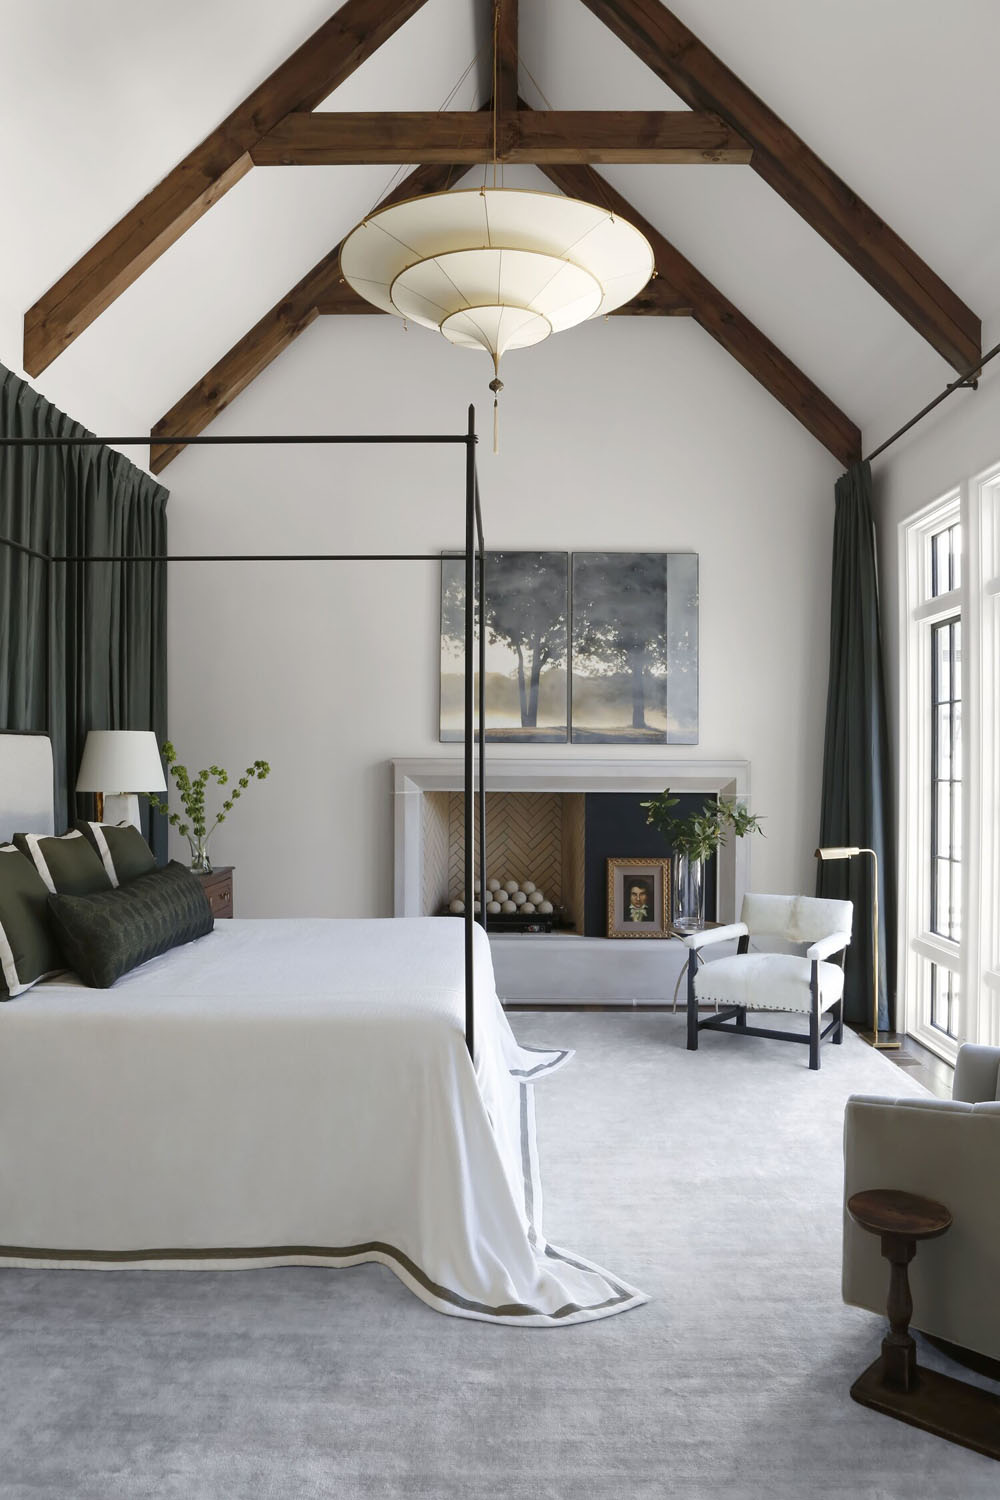 Bedroom with Vaulted Ceiling and Wood Beams